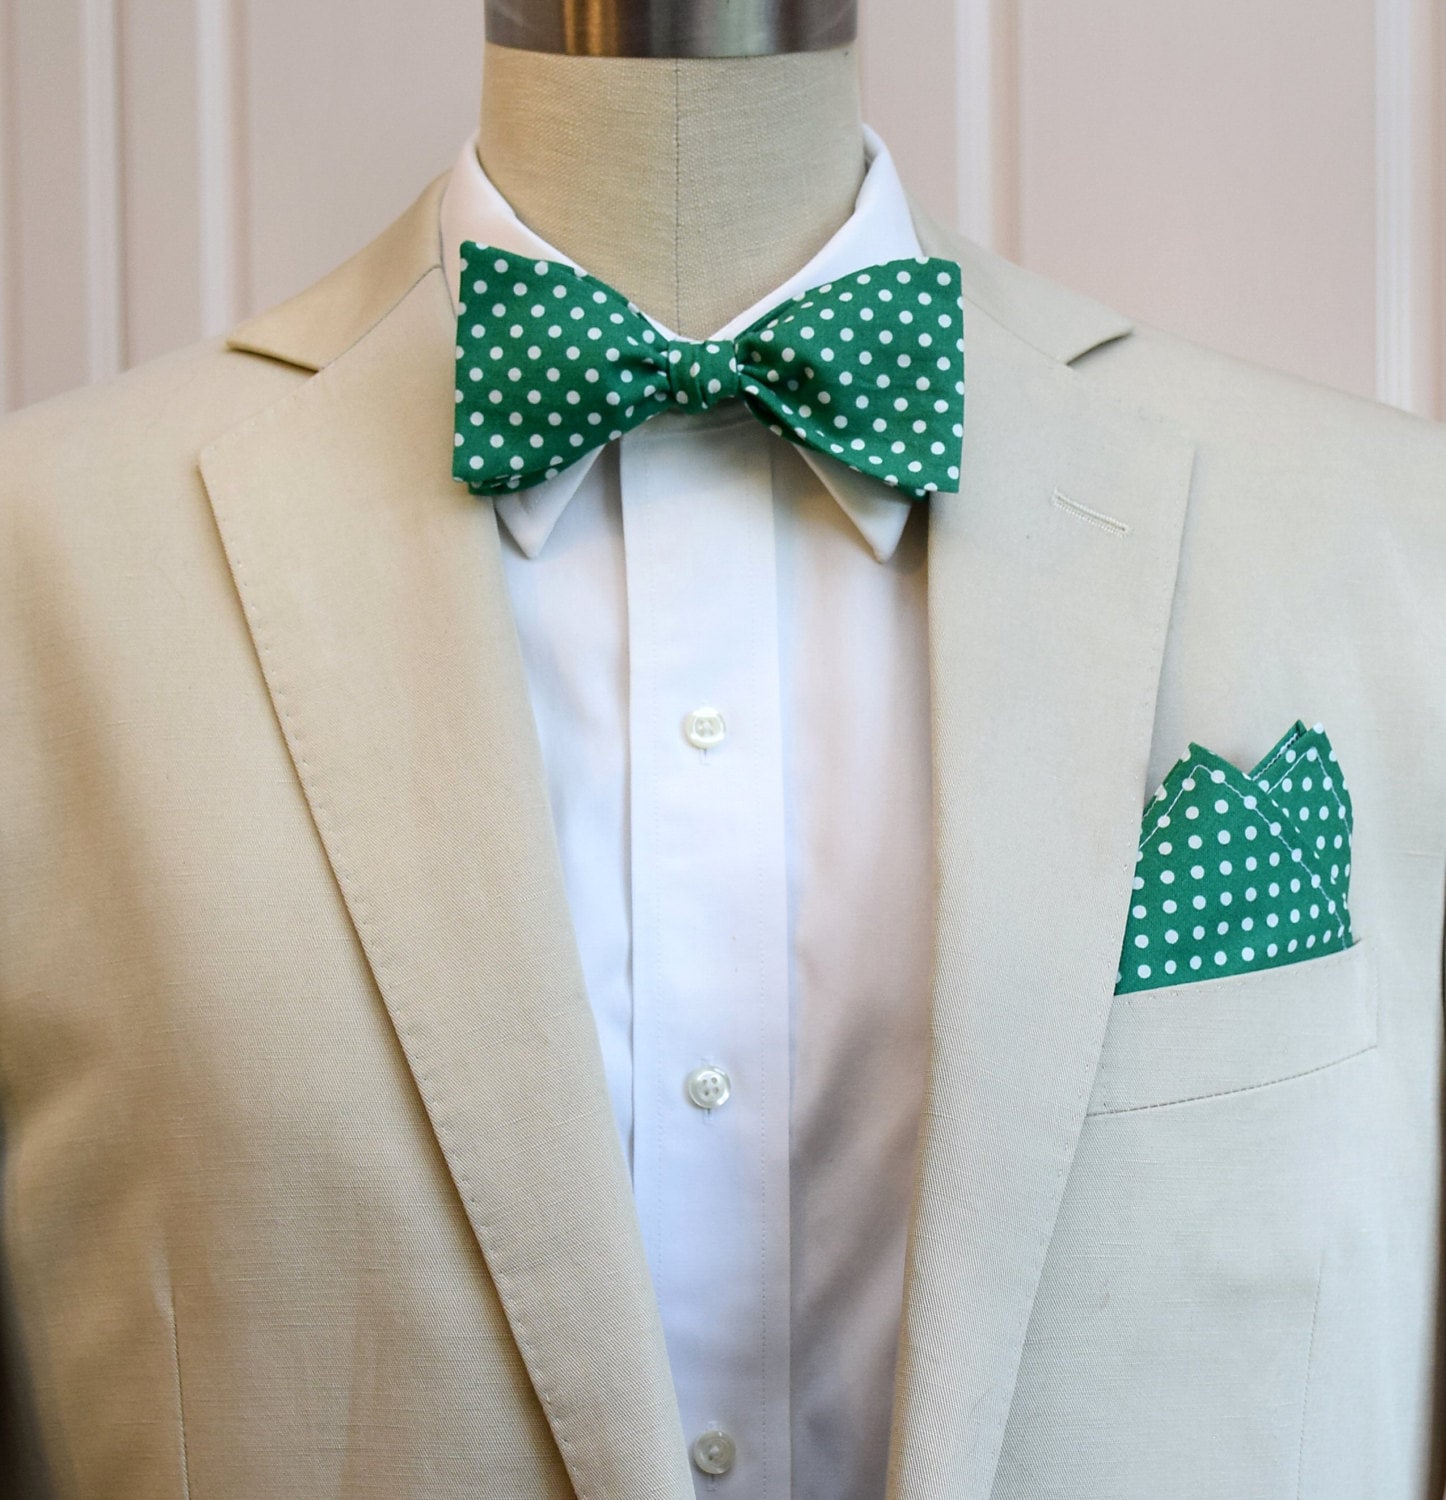 Men's Pocket Square and Bow Tie, emerald green with white polka dots ...